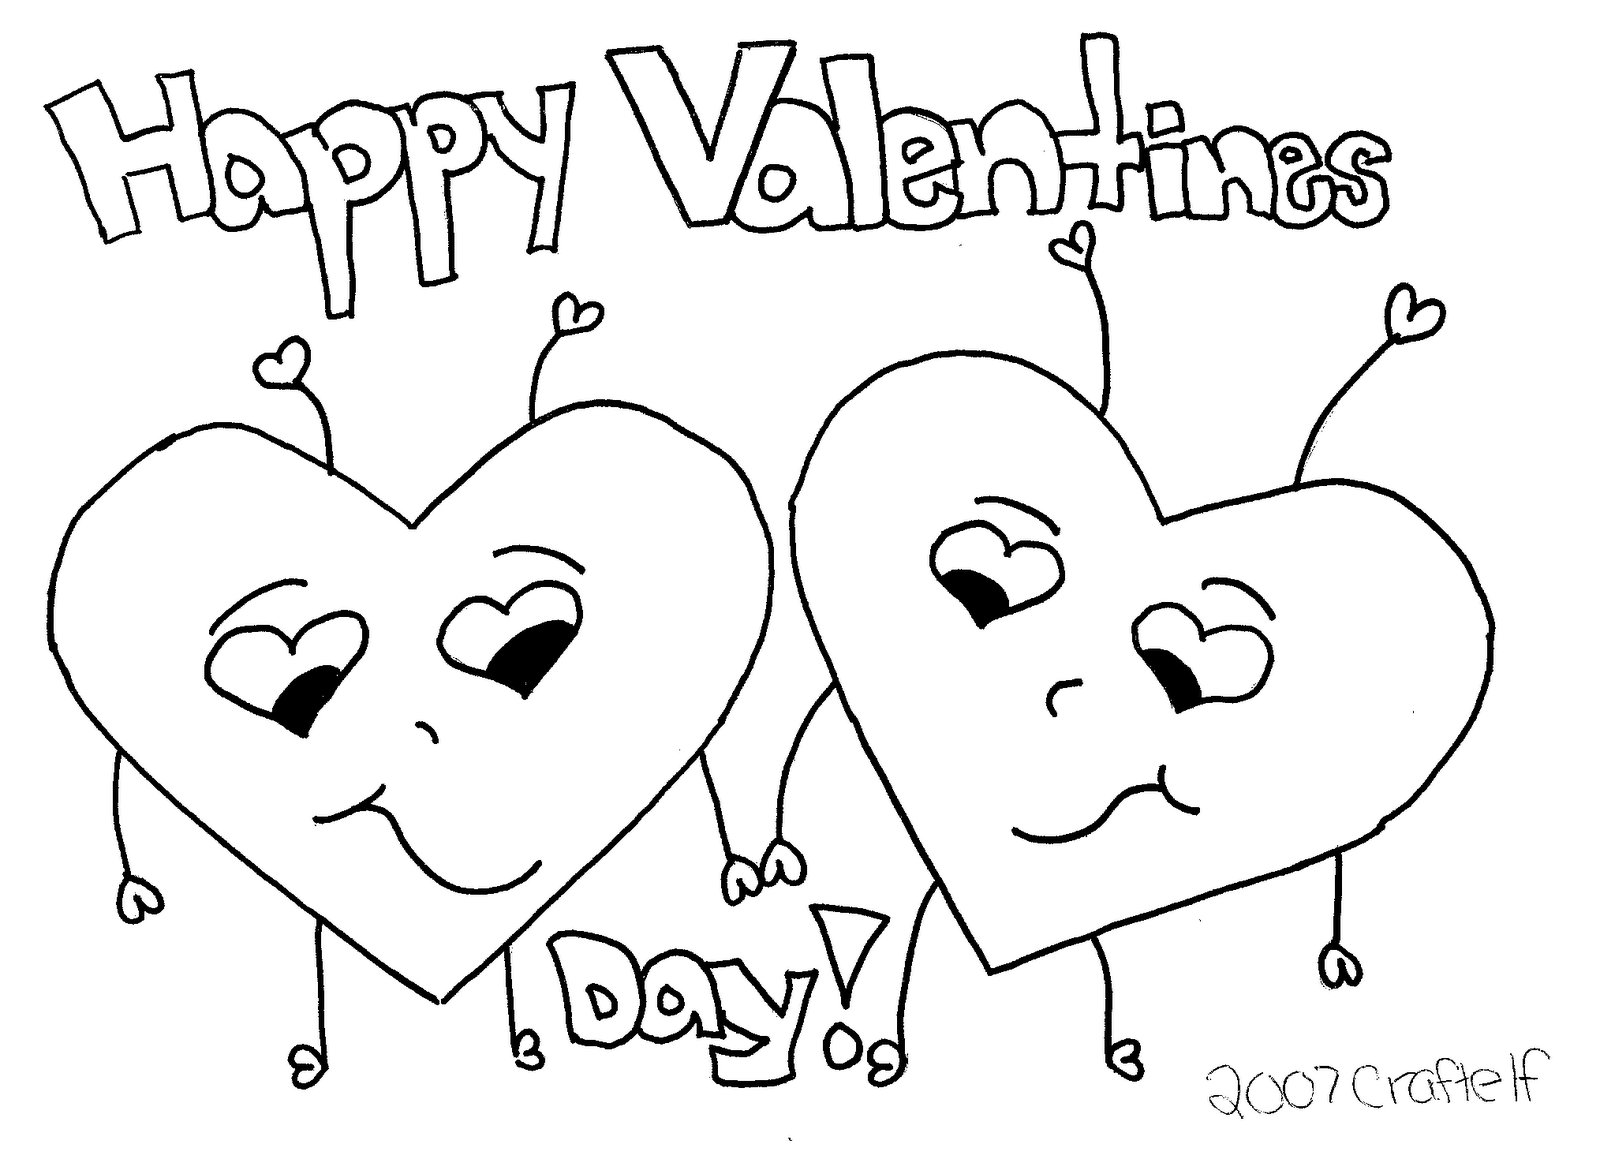 Valentines Day Coloring Pages For Kids (13 Pictures) - Colorine ...